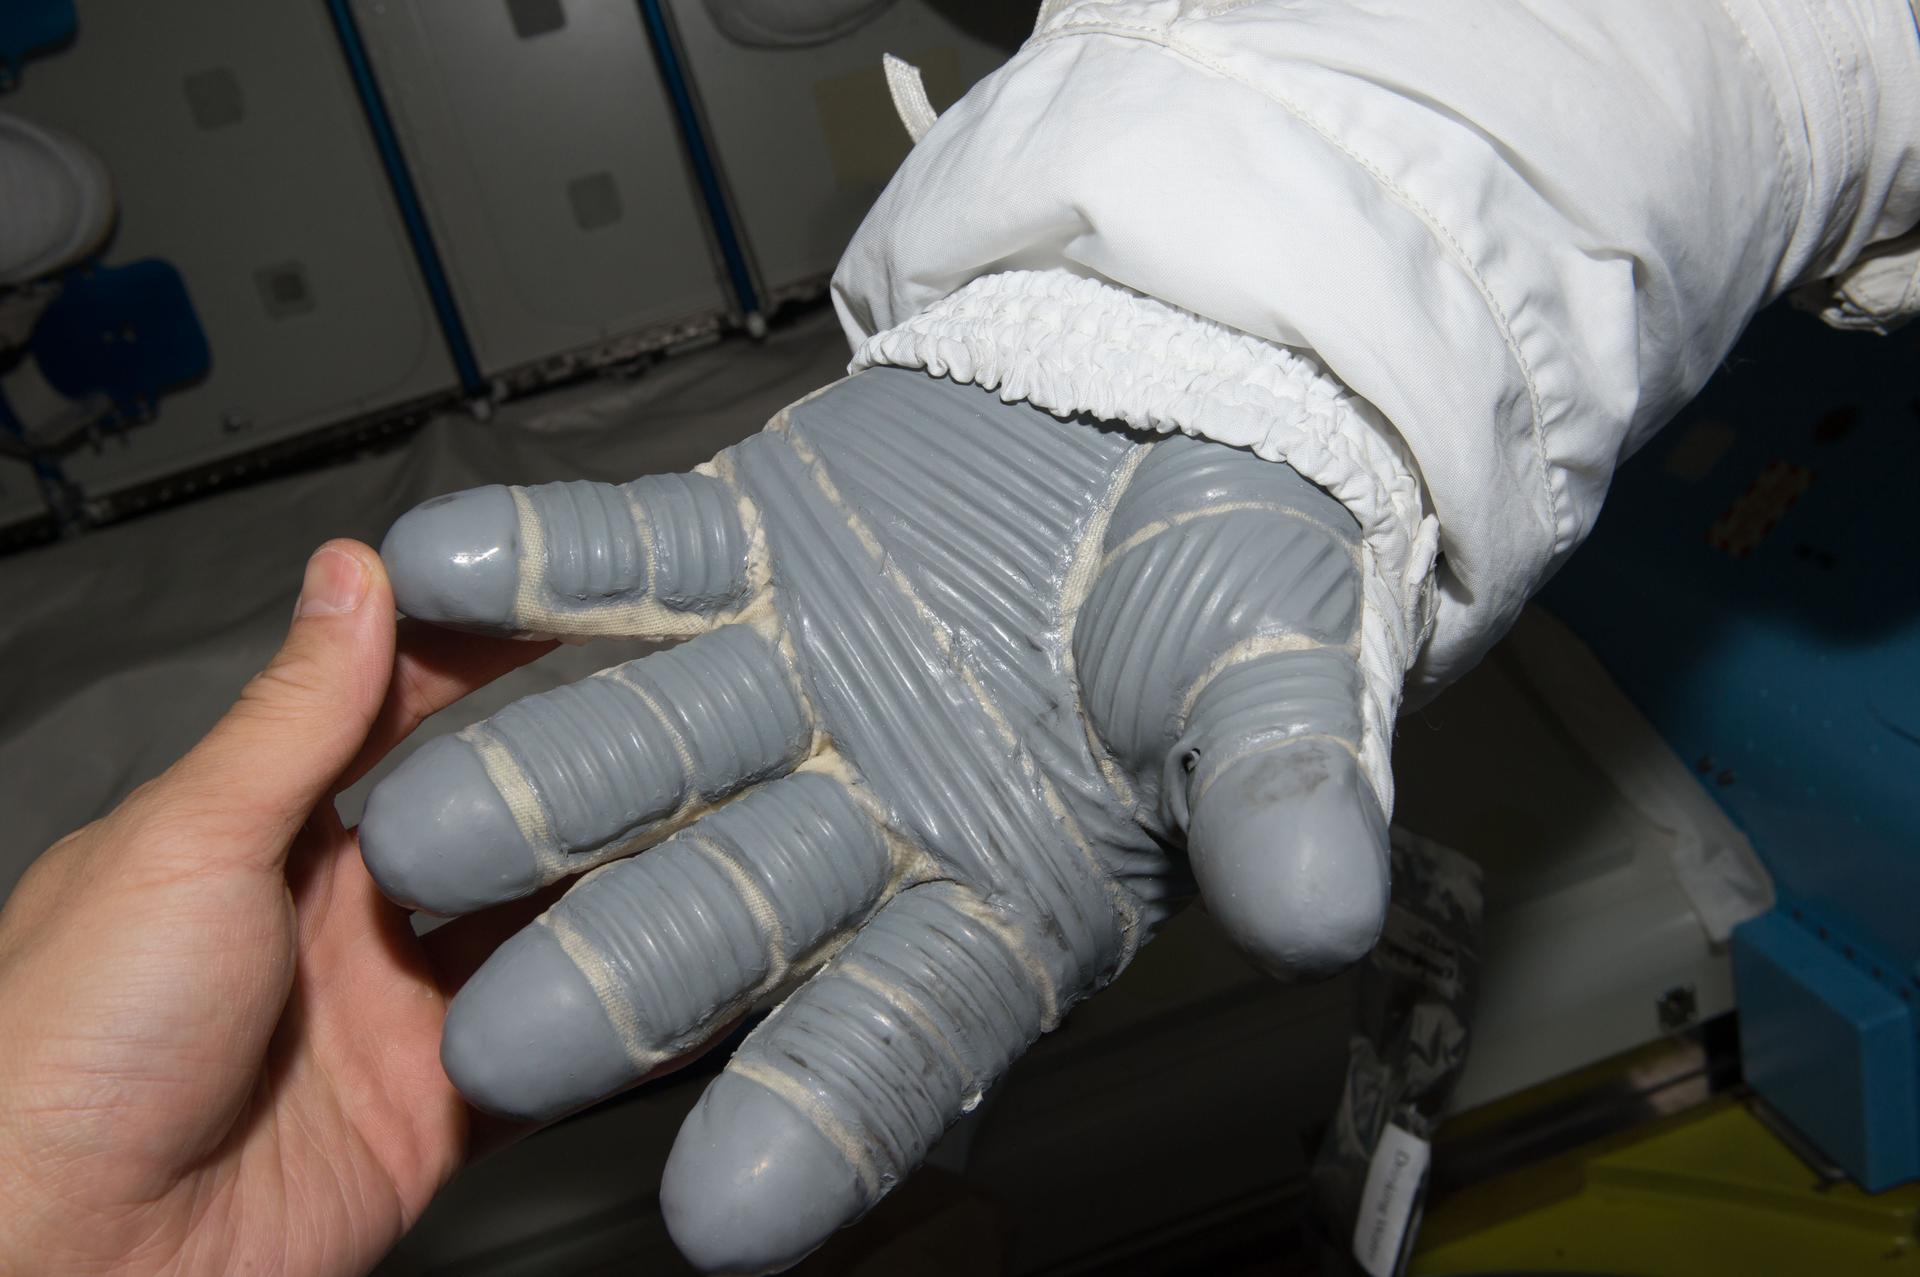 ss048e061332 (08/19/2016) --- Checking the space gloves before and after a spacewalk is part of the detailed check list astronauts go through to provide absolute safety.